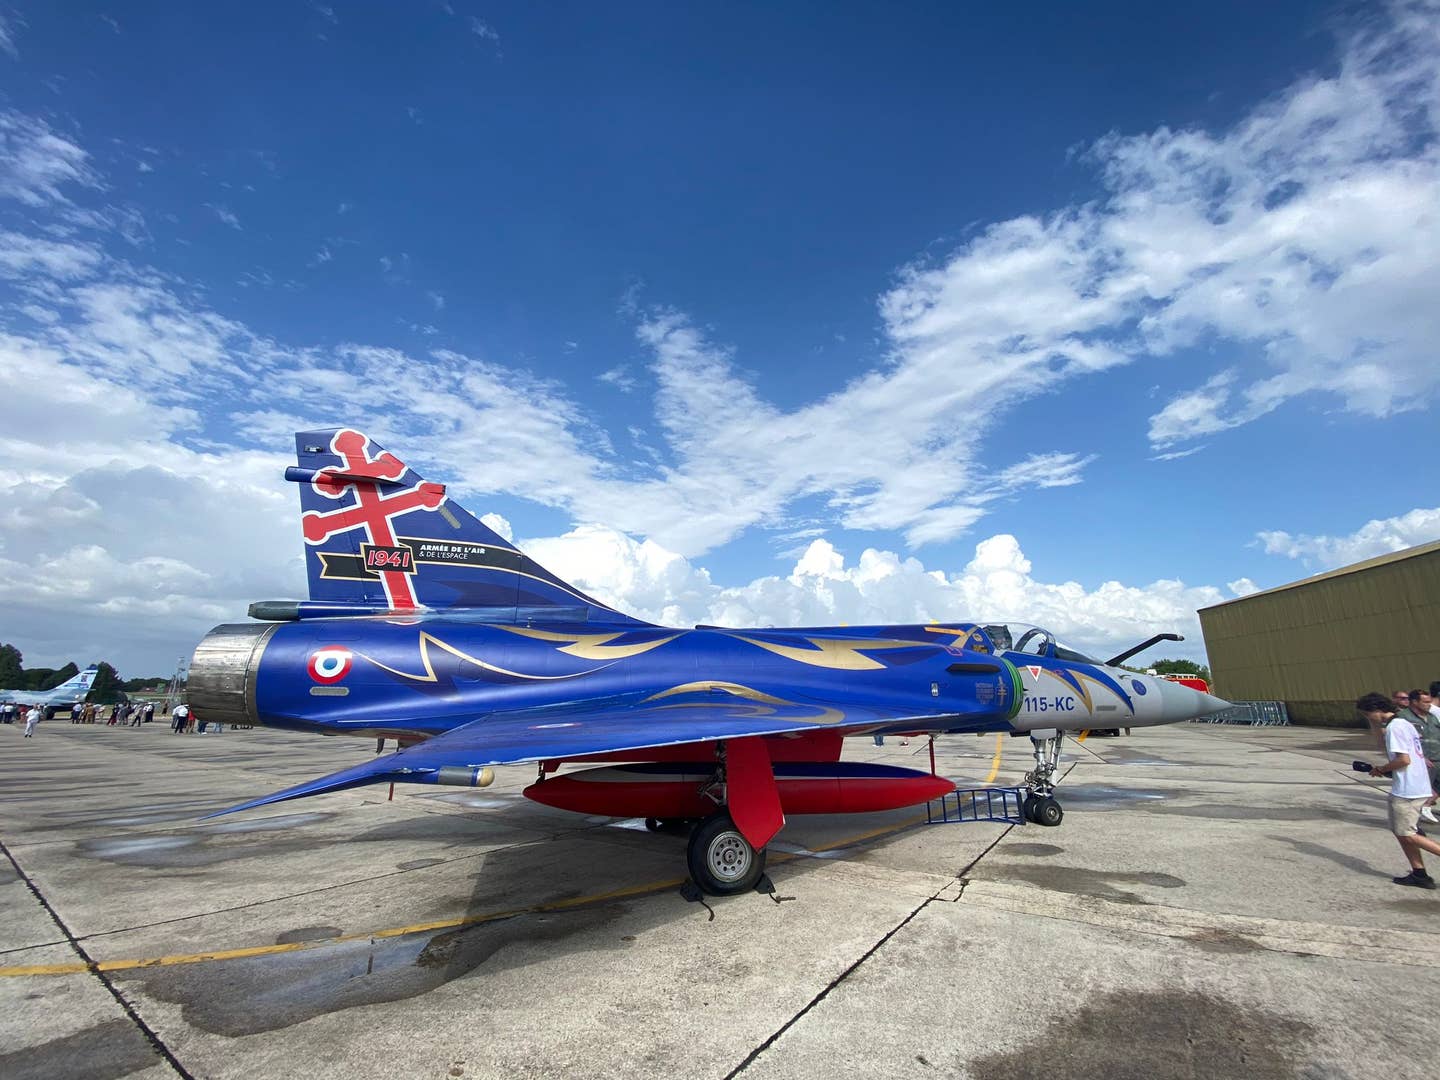 The 80th-anniversary jet at Orange-Caritat on June 23. The motif is based on the Cross of Lorraine, the symbol of the Free French in World War II. <em>Ian Black</em>